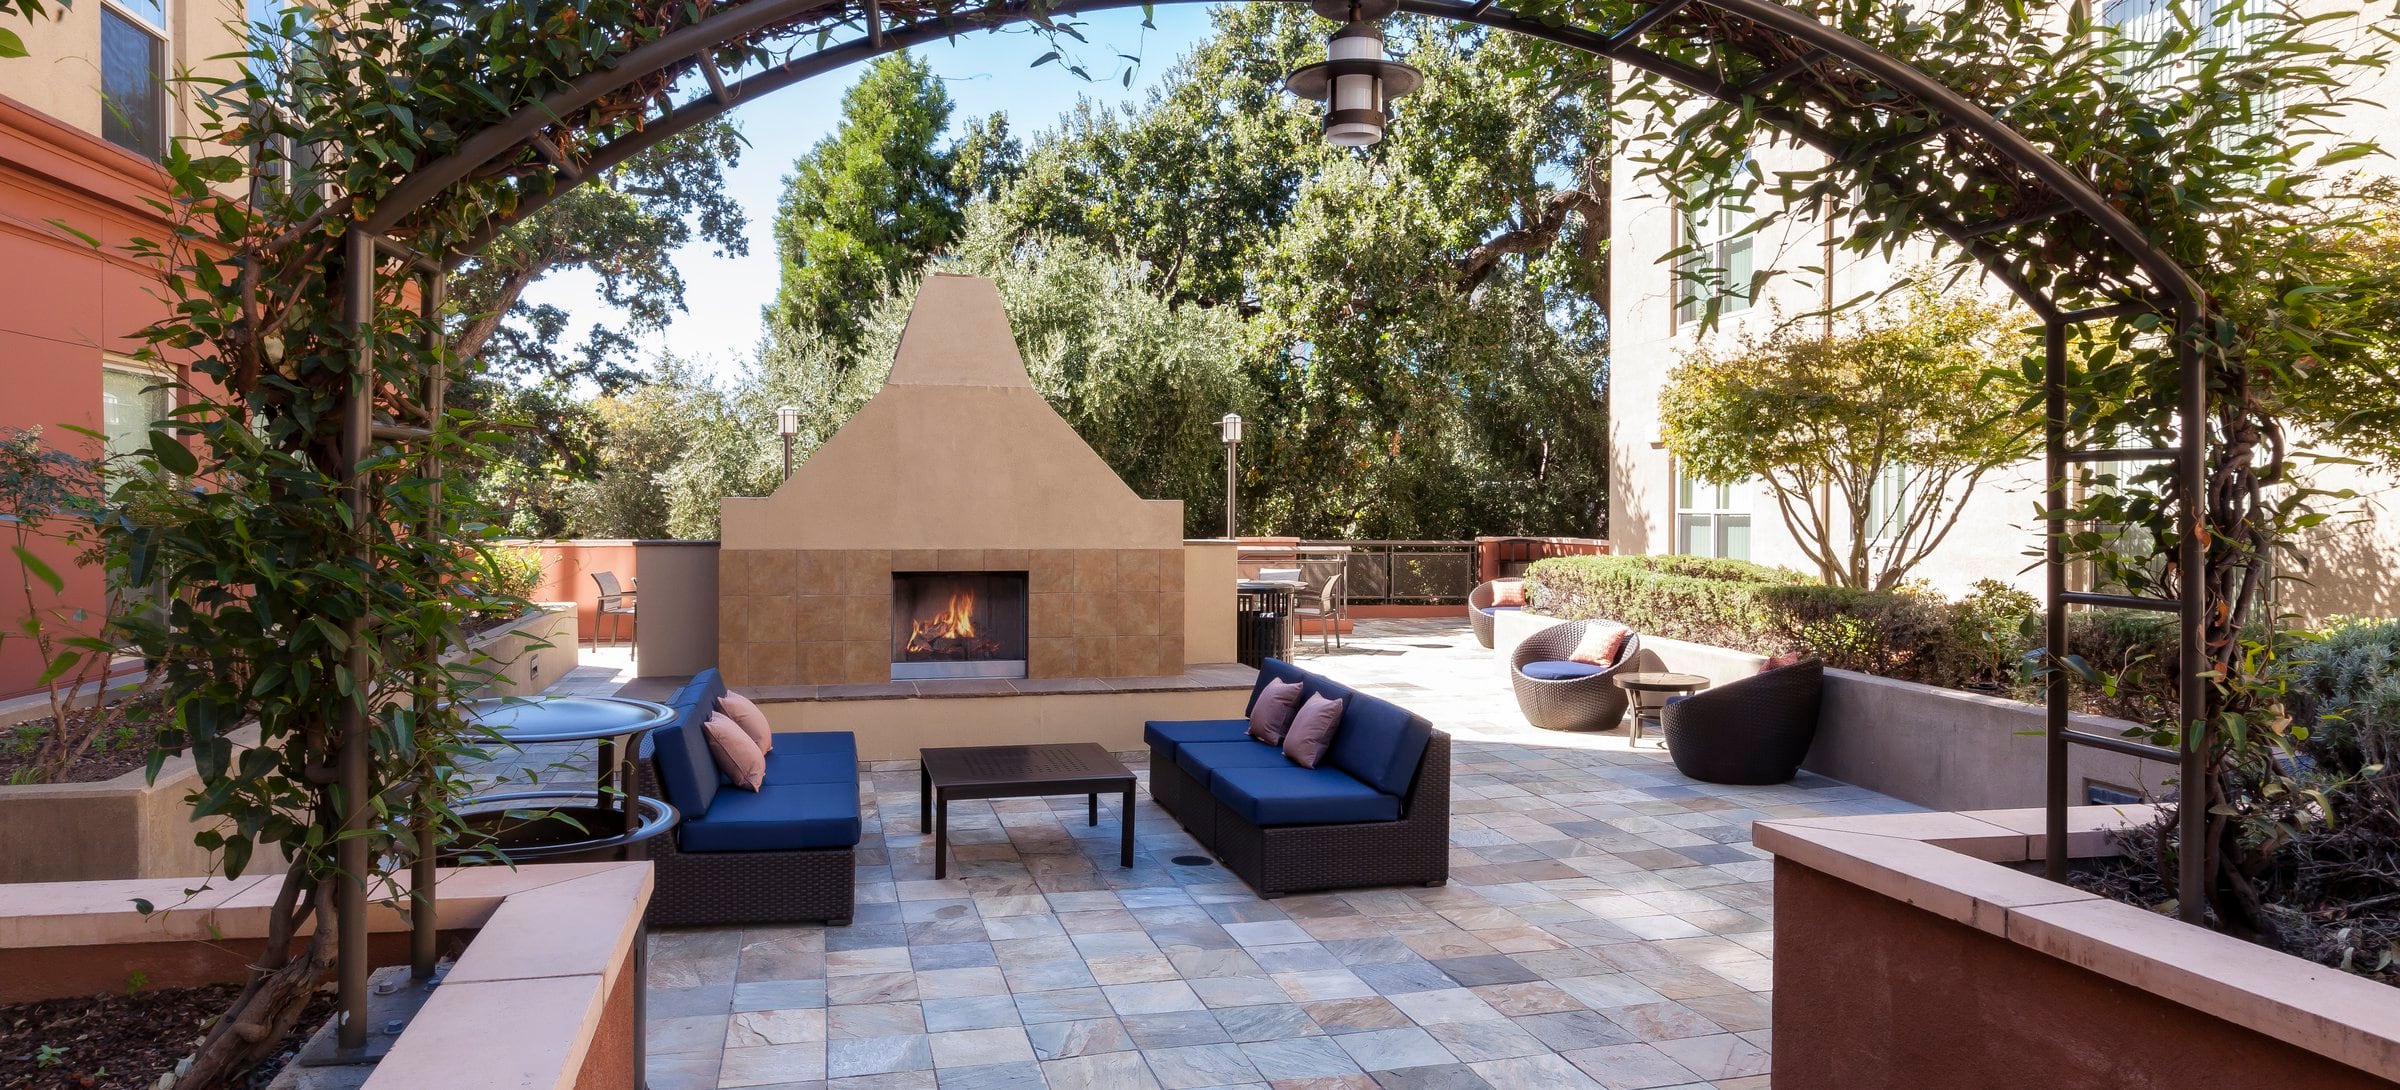 Phase I Courtyard with Fireplace and Lounge Seating